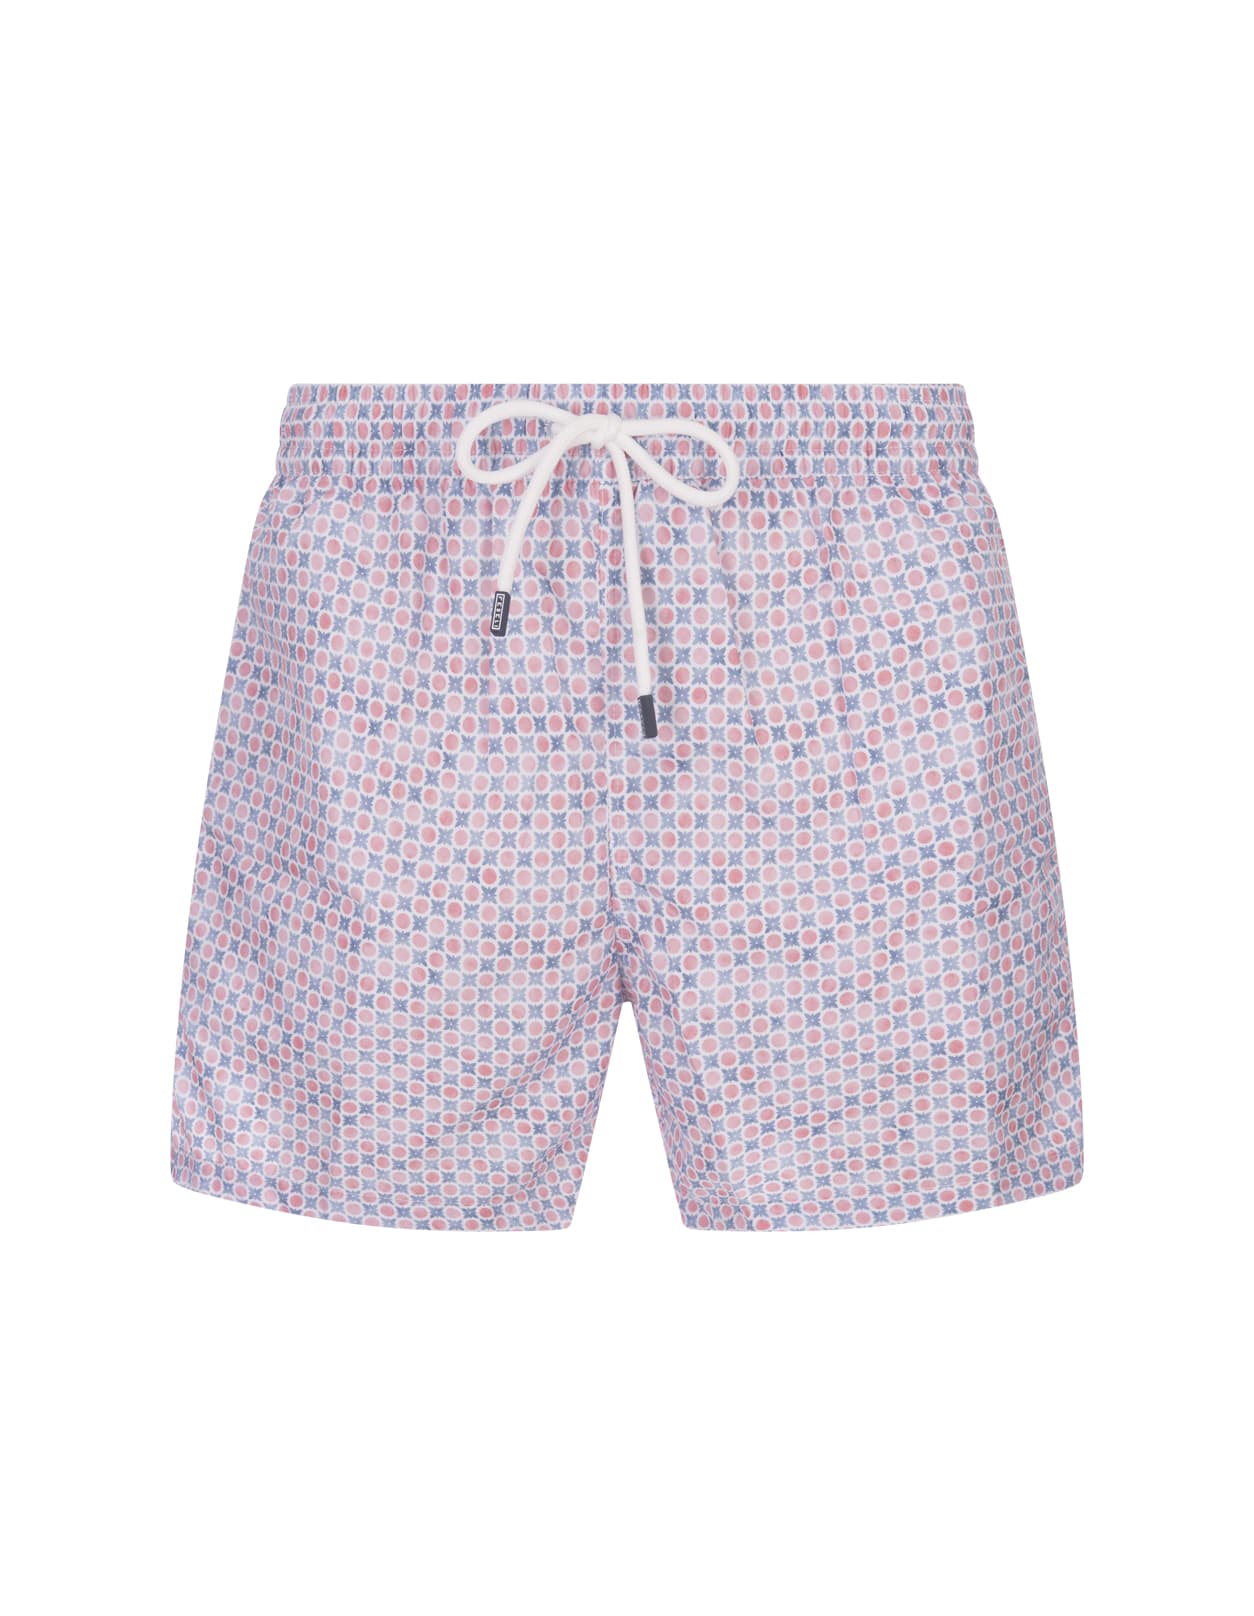 Fedeli Swim Shorts With Micro Pattern Of Polka Dots And Flowers In Pink